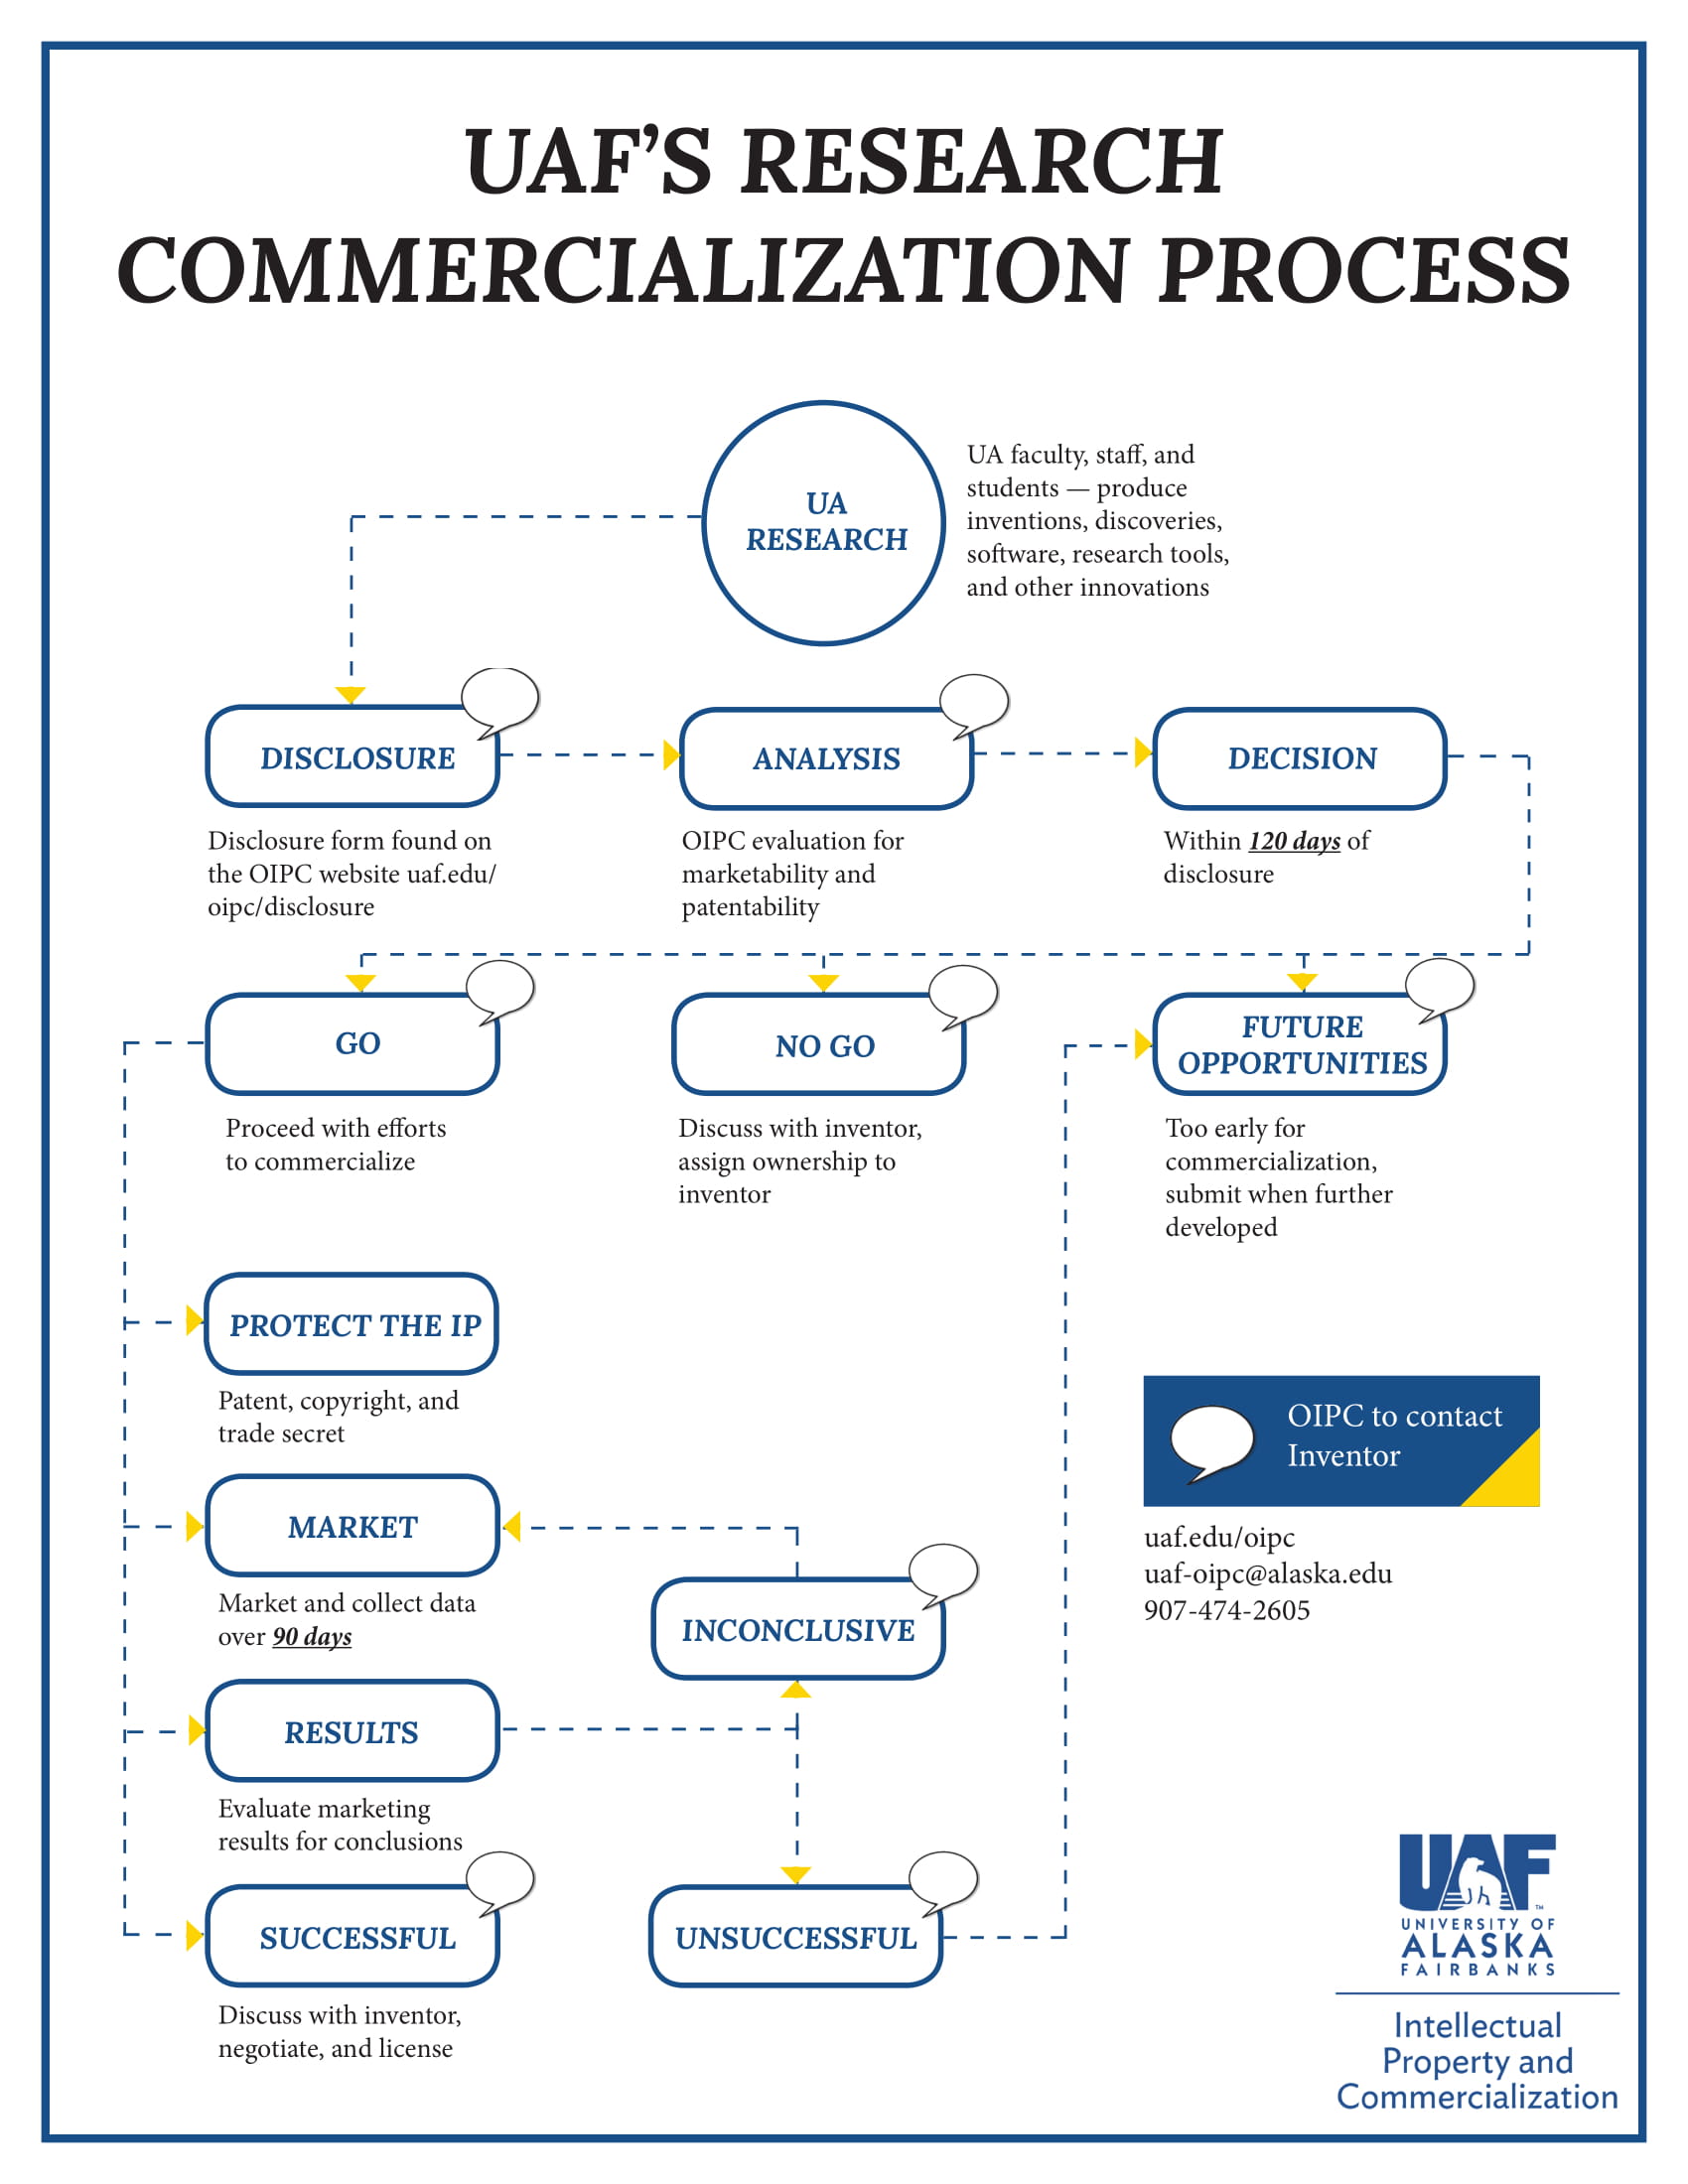 UAF's Research Commercialization Process image